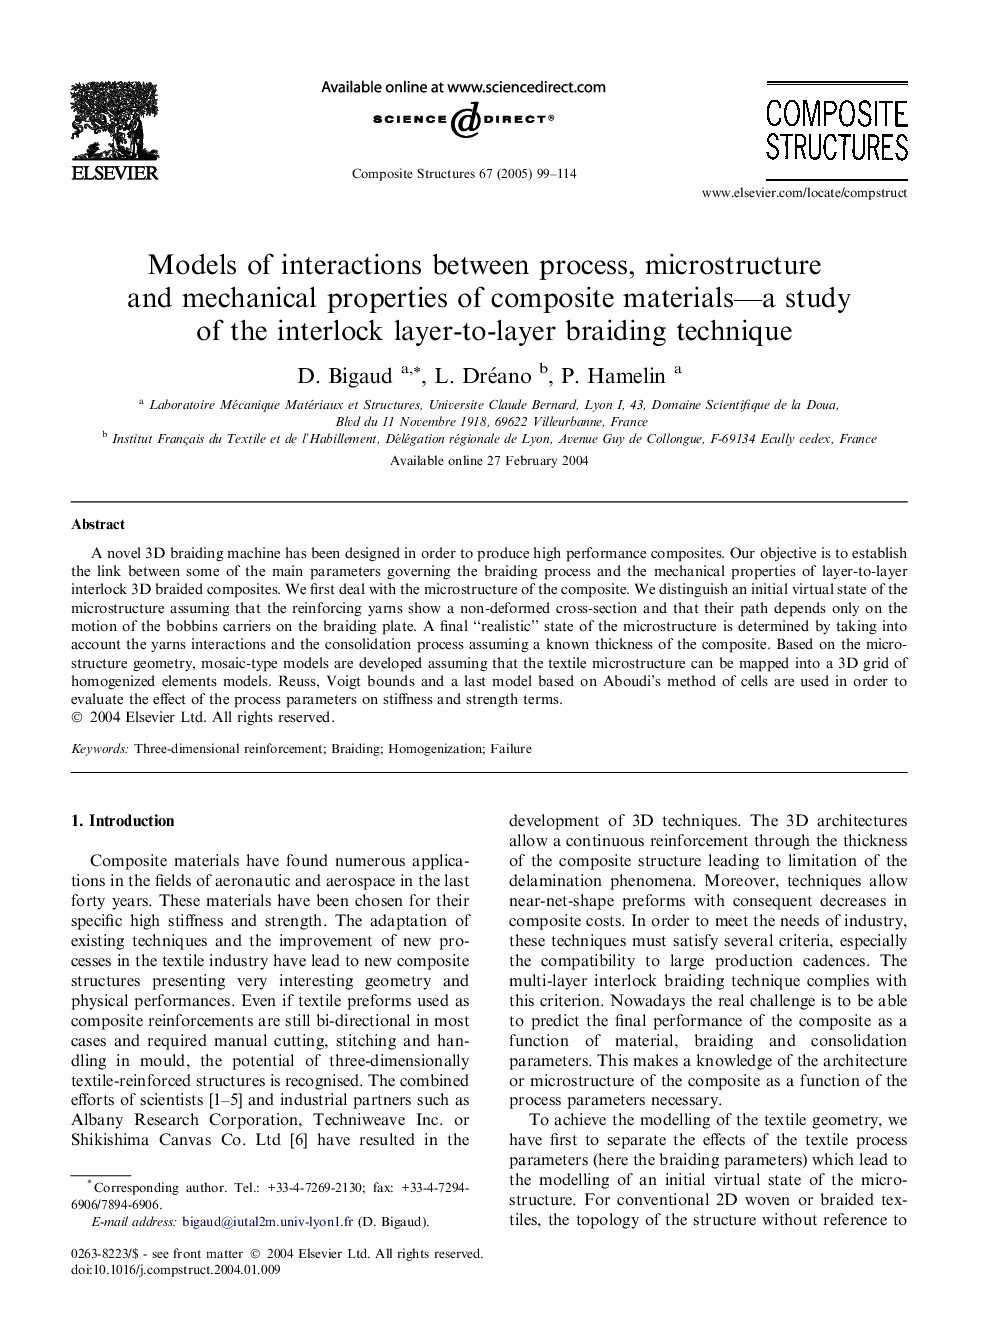 Models of interactions between process, microstructure and mechanical properties of composite materials--a study of the interlock layer-to-layer braiding technique